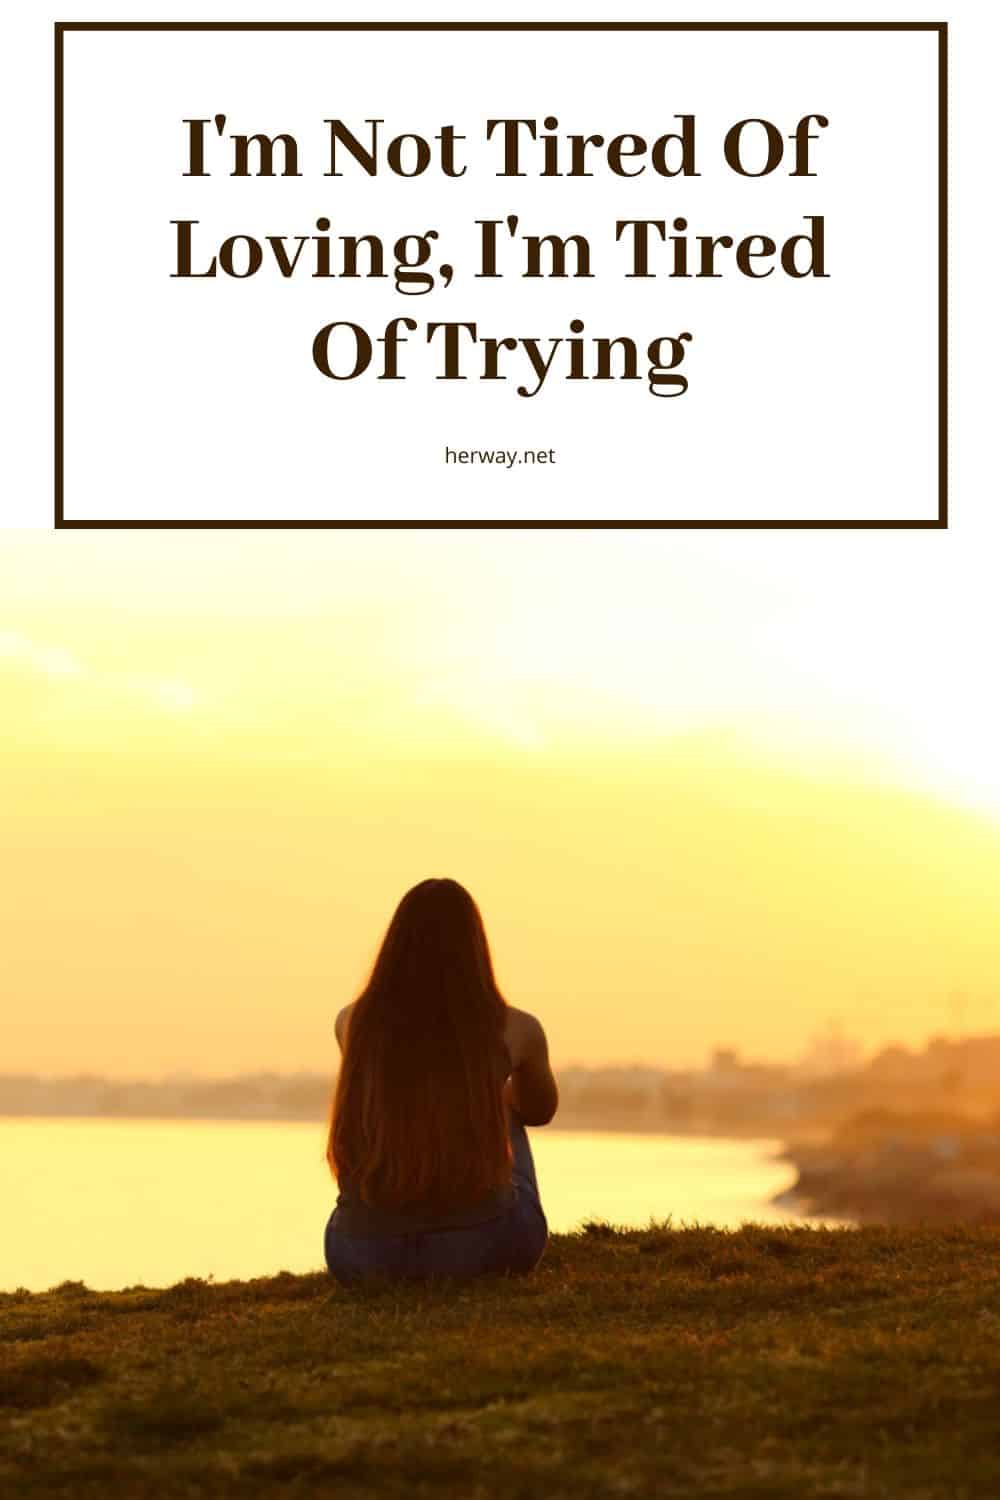 I'm Not Tired Of Loving, I'm Tired Of Trying